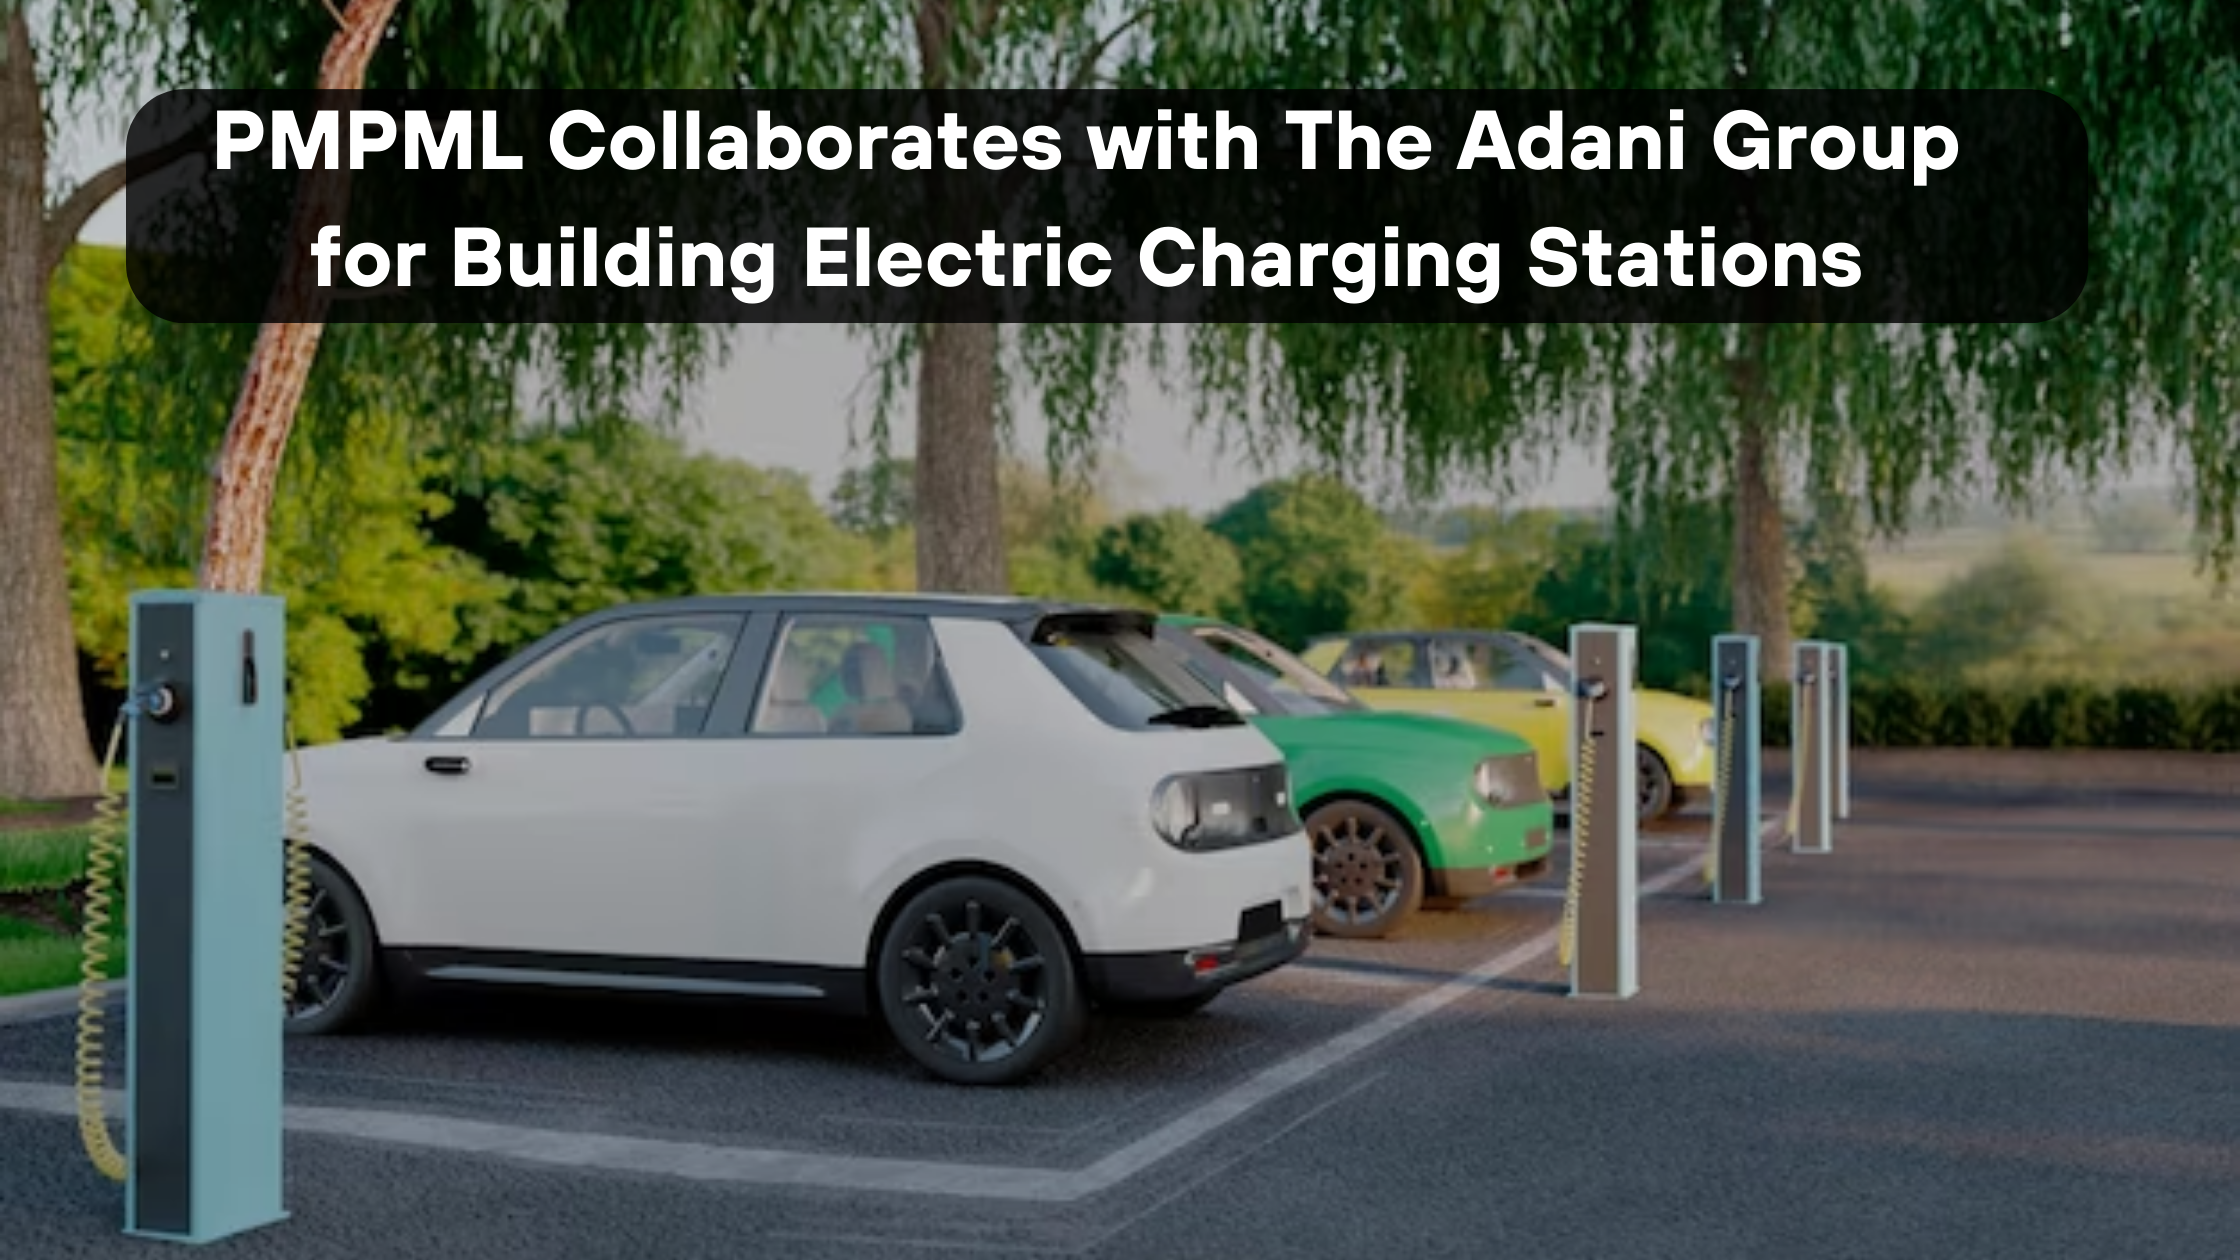 PMPML Collaborates with The Adani Group for Building Electric Charging Stations